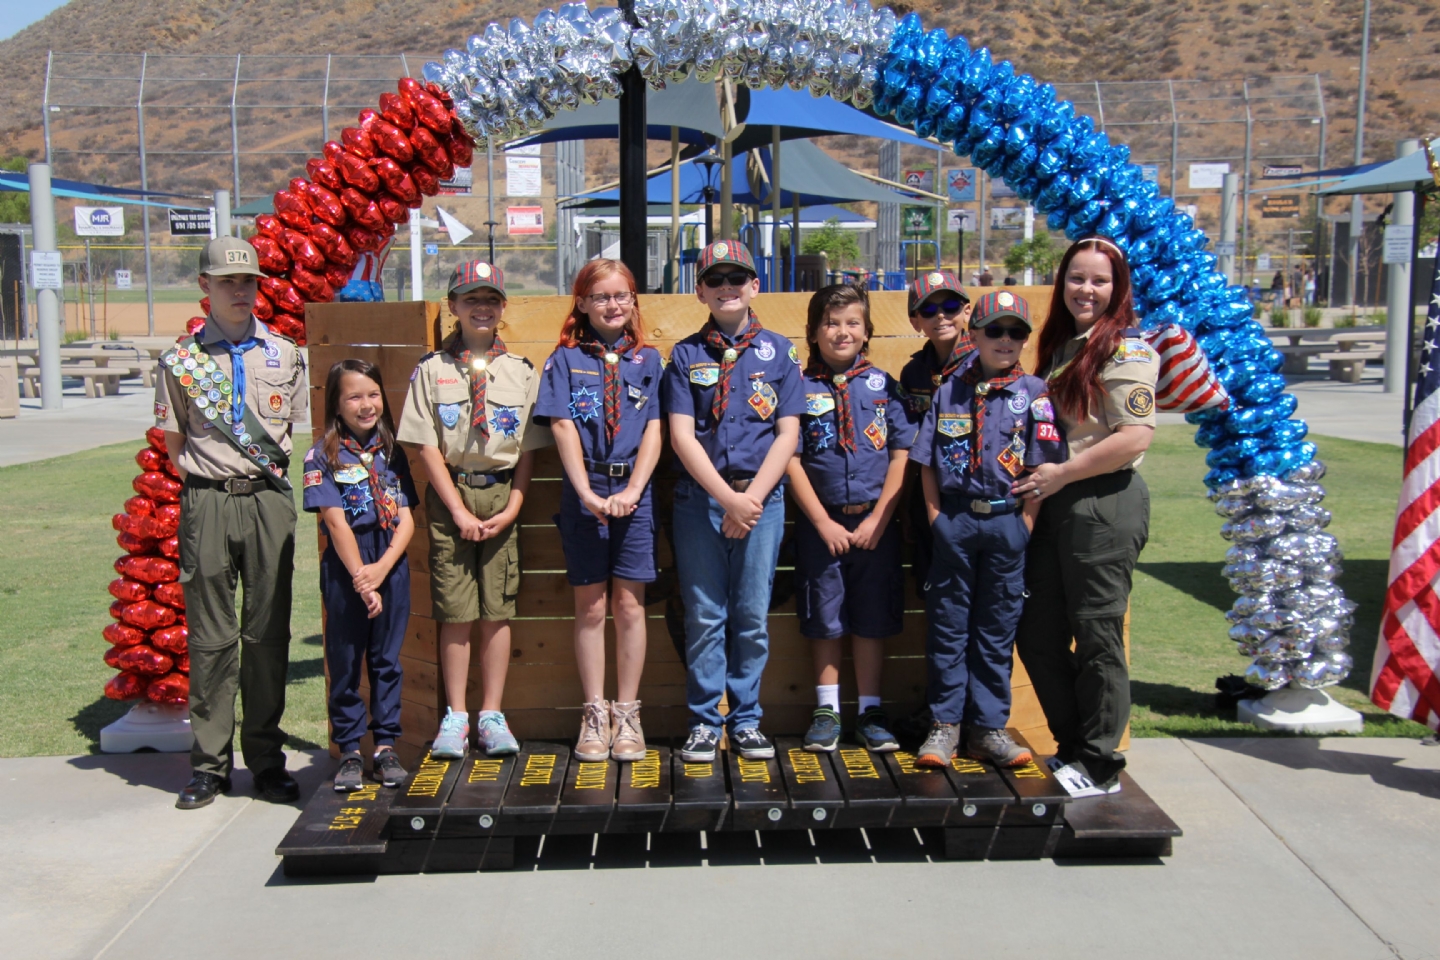 The crossover bridge that the graduating AOLs Scouts can walk across from the left side to the right side is situated up front. The Cubmaster and Assistant Cubmaster stand on the left side of the bridge. The troop representatives are called up and stand on the right side of the bridge.